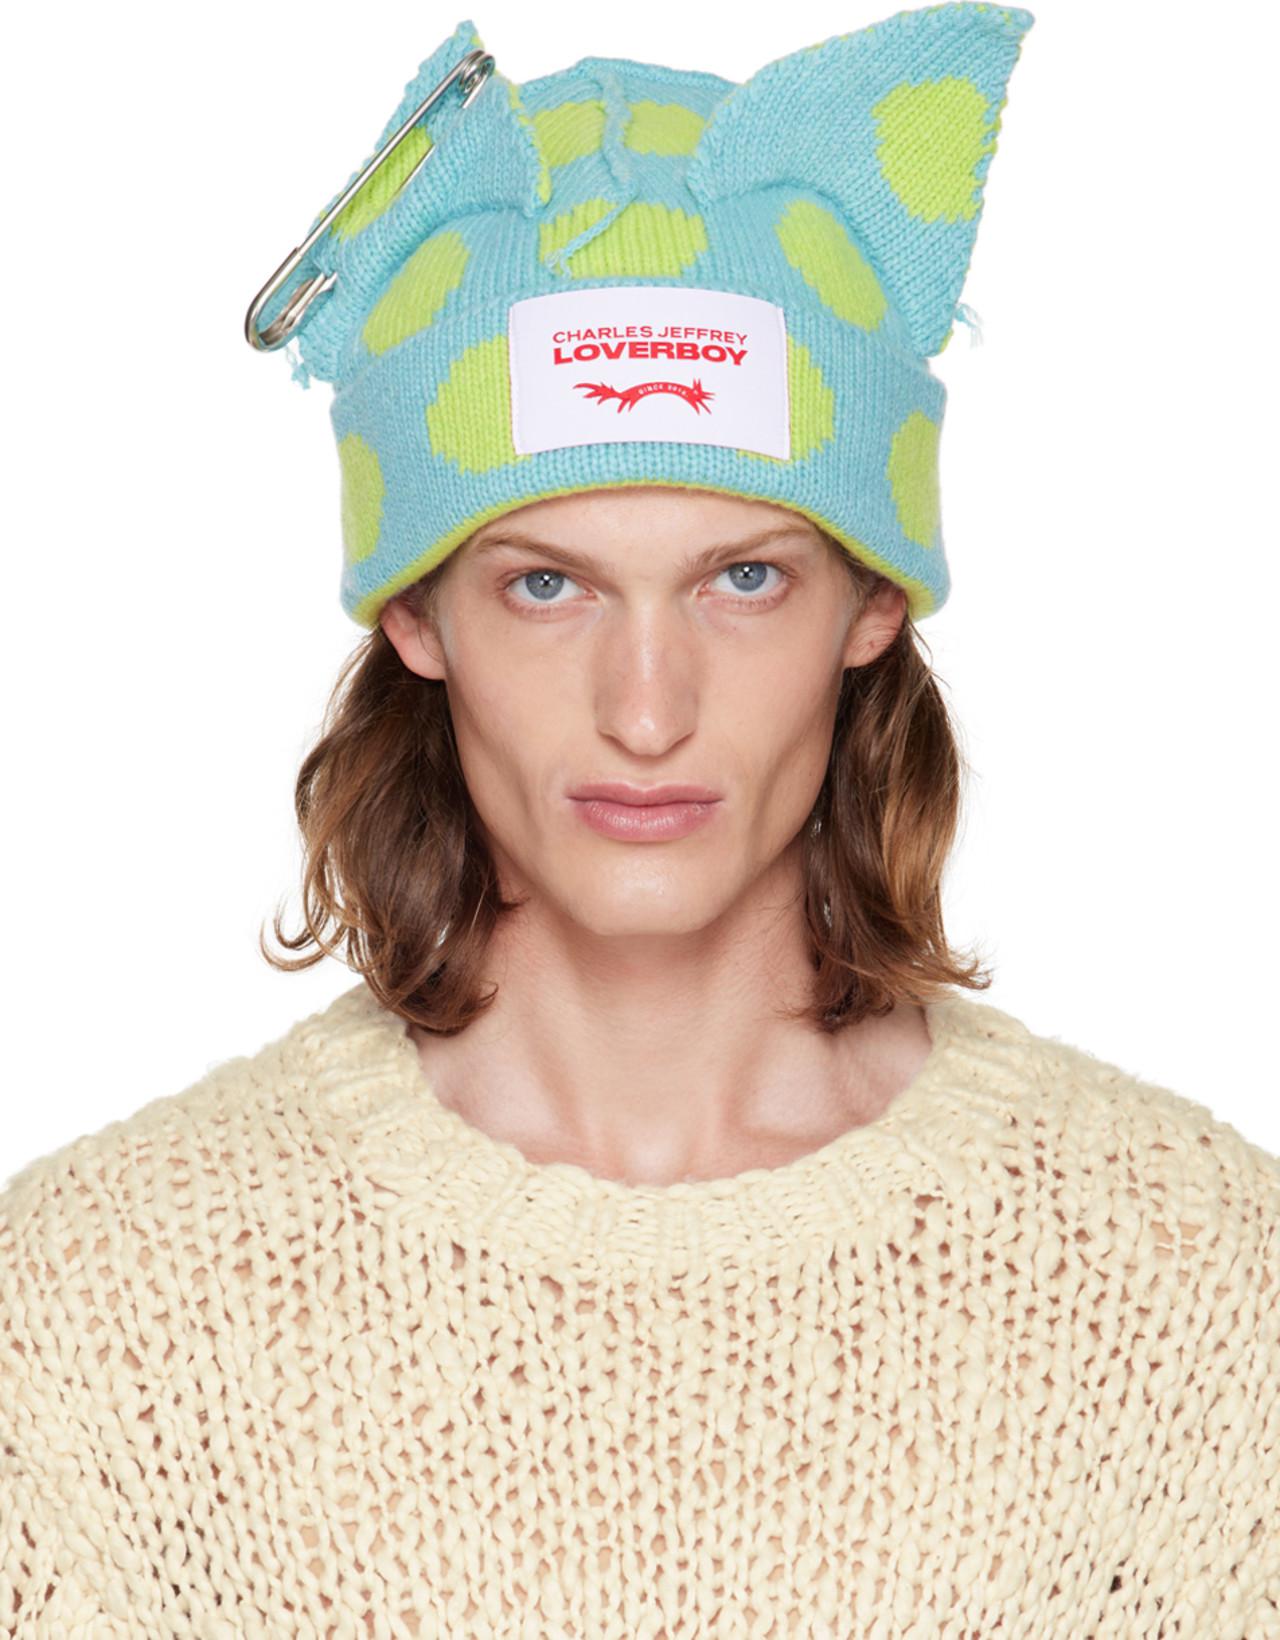 SSENSE Exclusive Blue & Green Punk Ears Beanie by CHARLES JEFFREY LOVERBOY